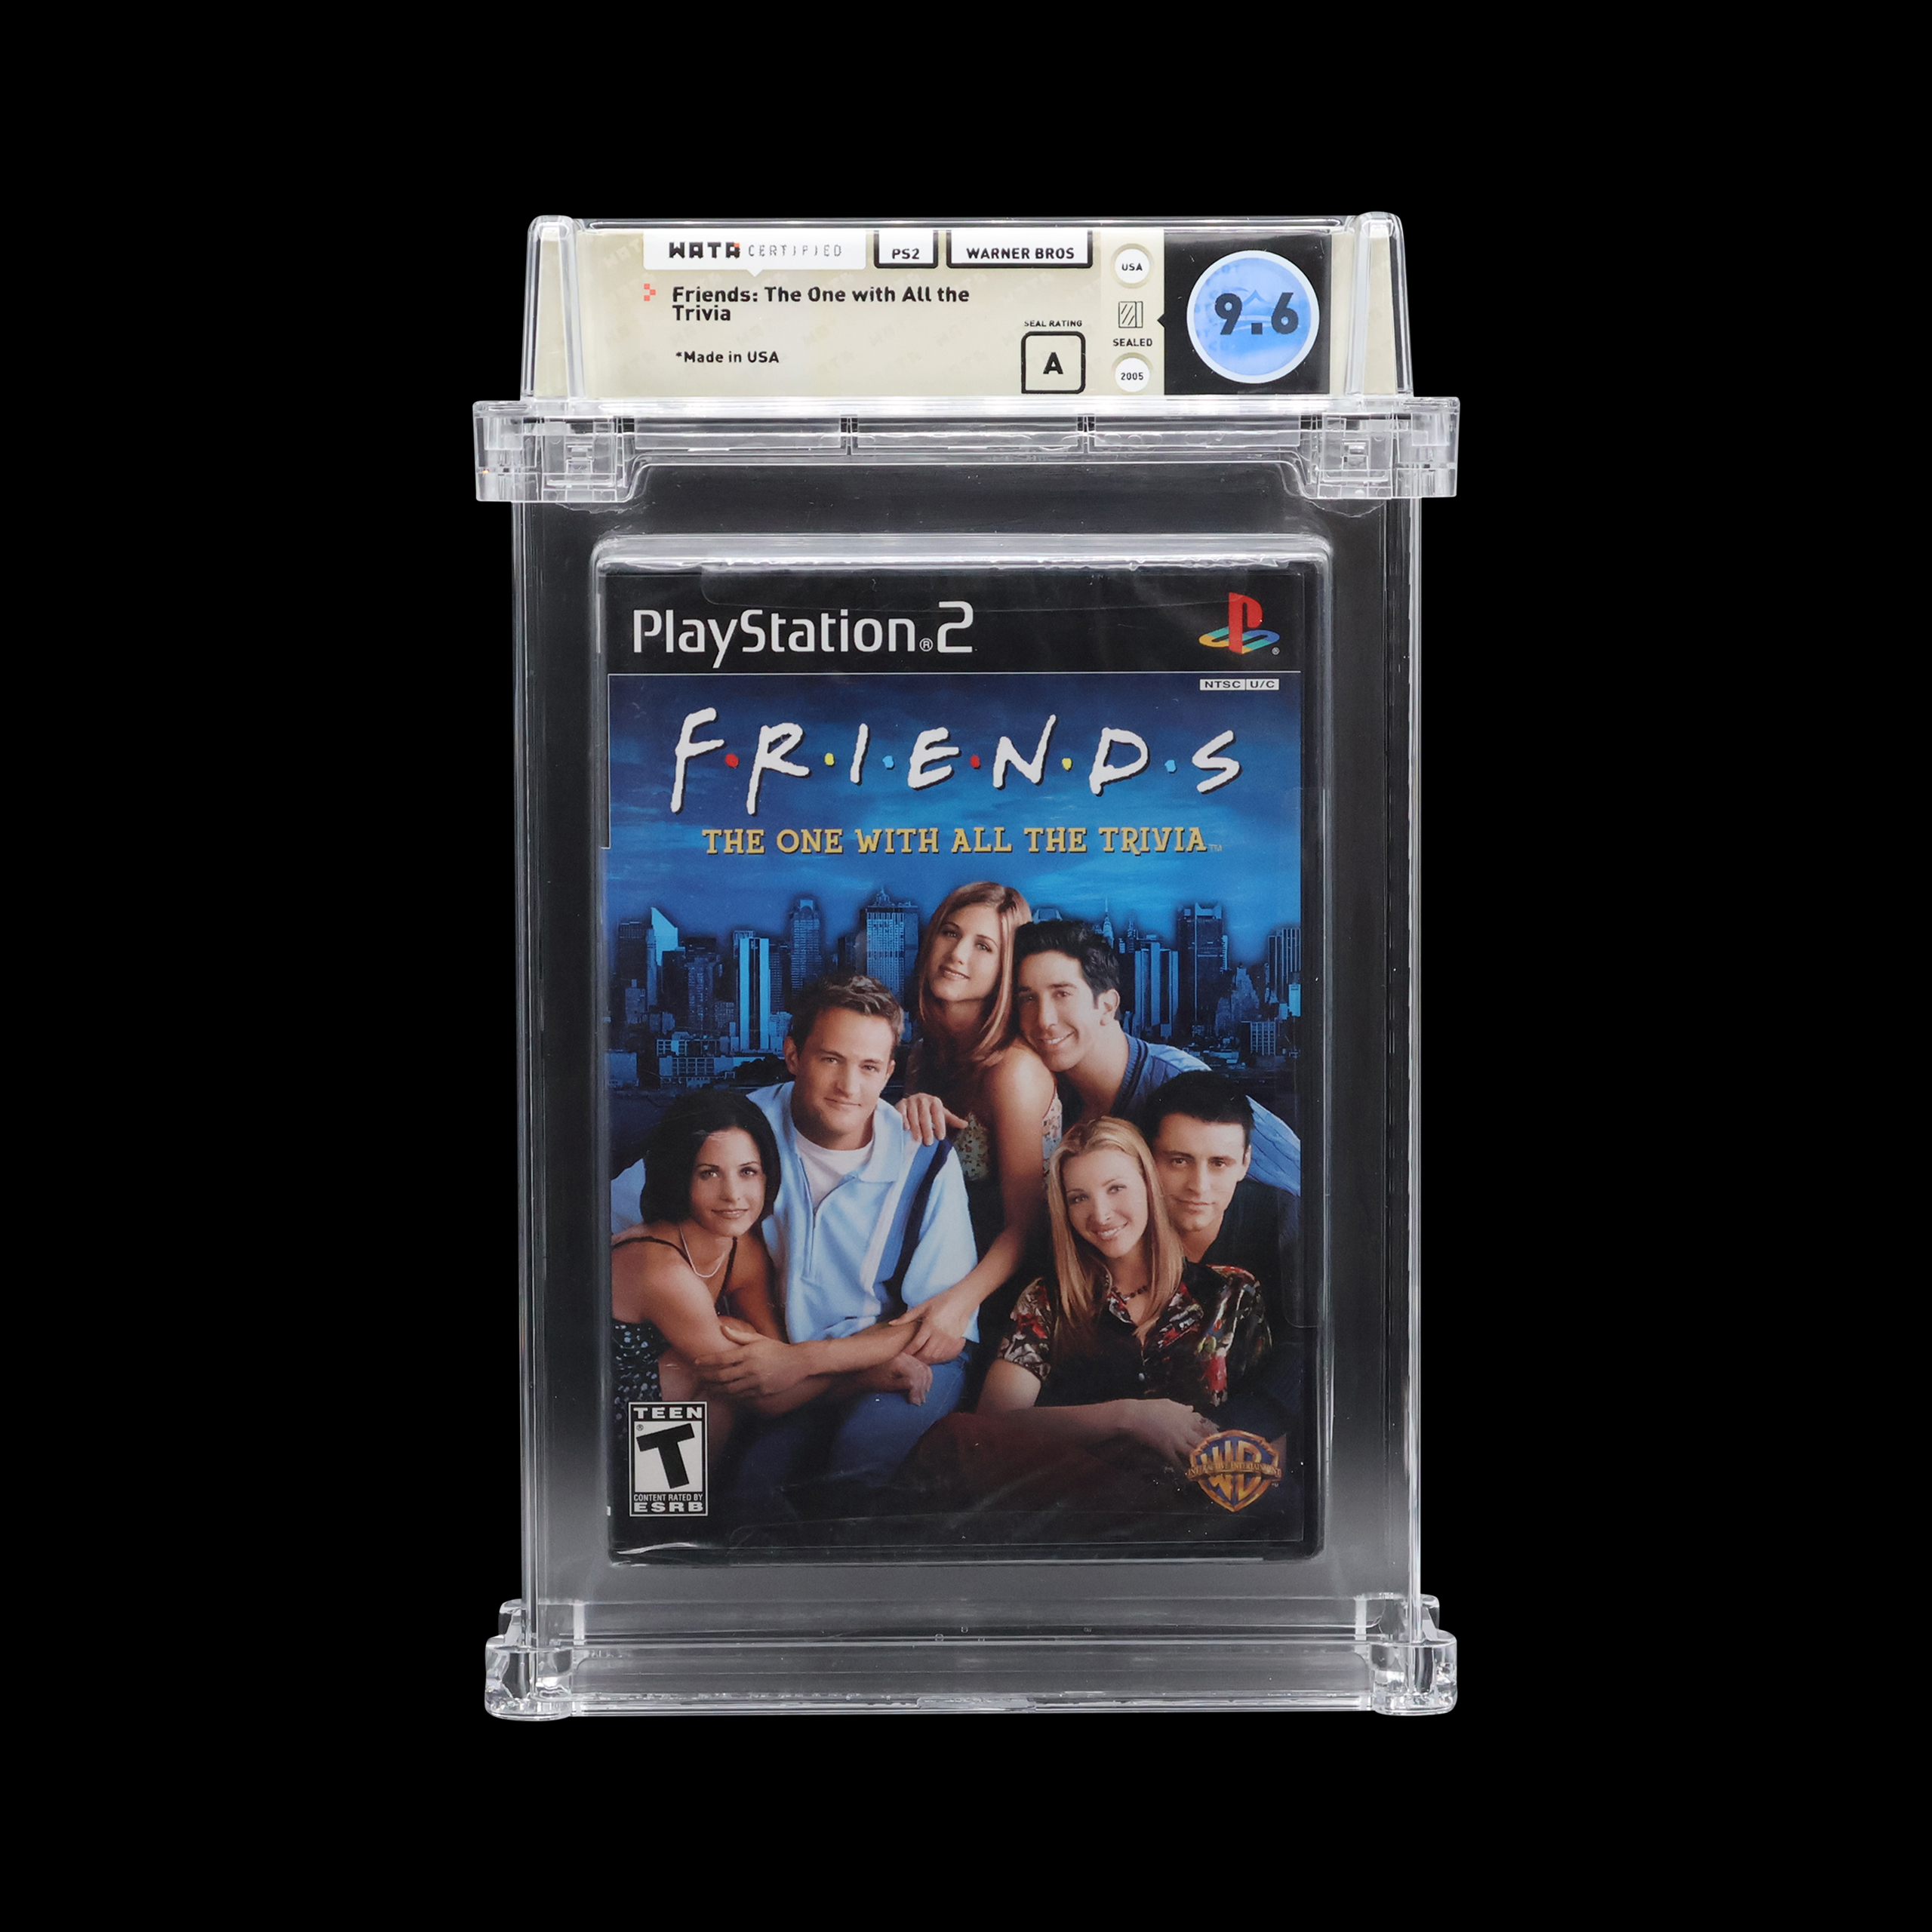 Collectible Friends Trivia PlayStation 2 game in WATA 9.6 condition with characters on cover.